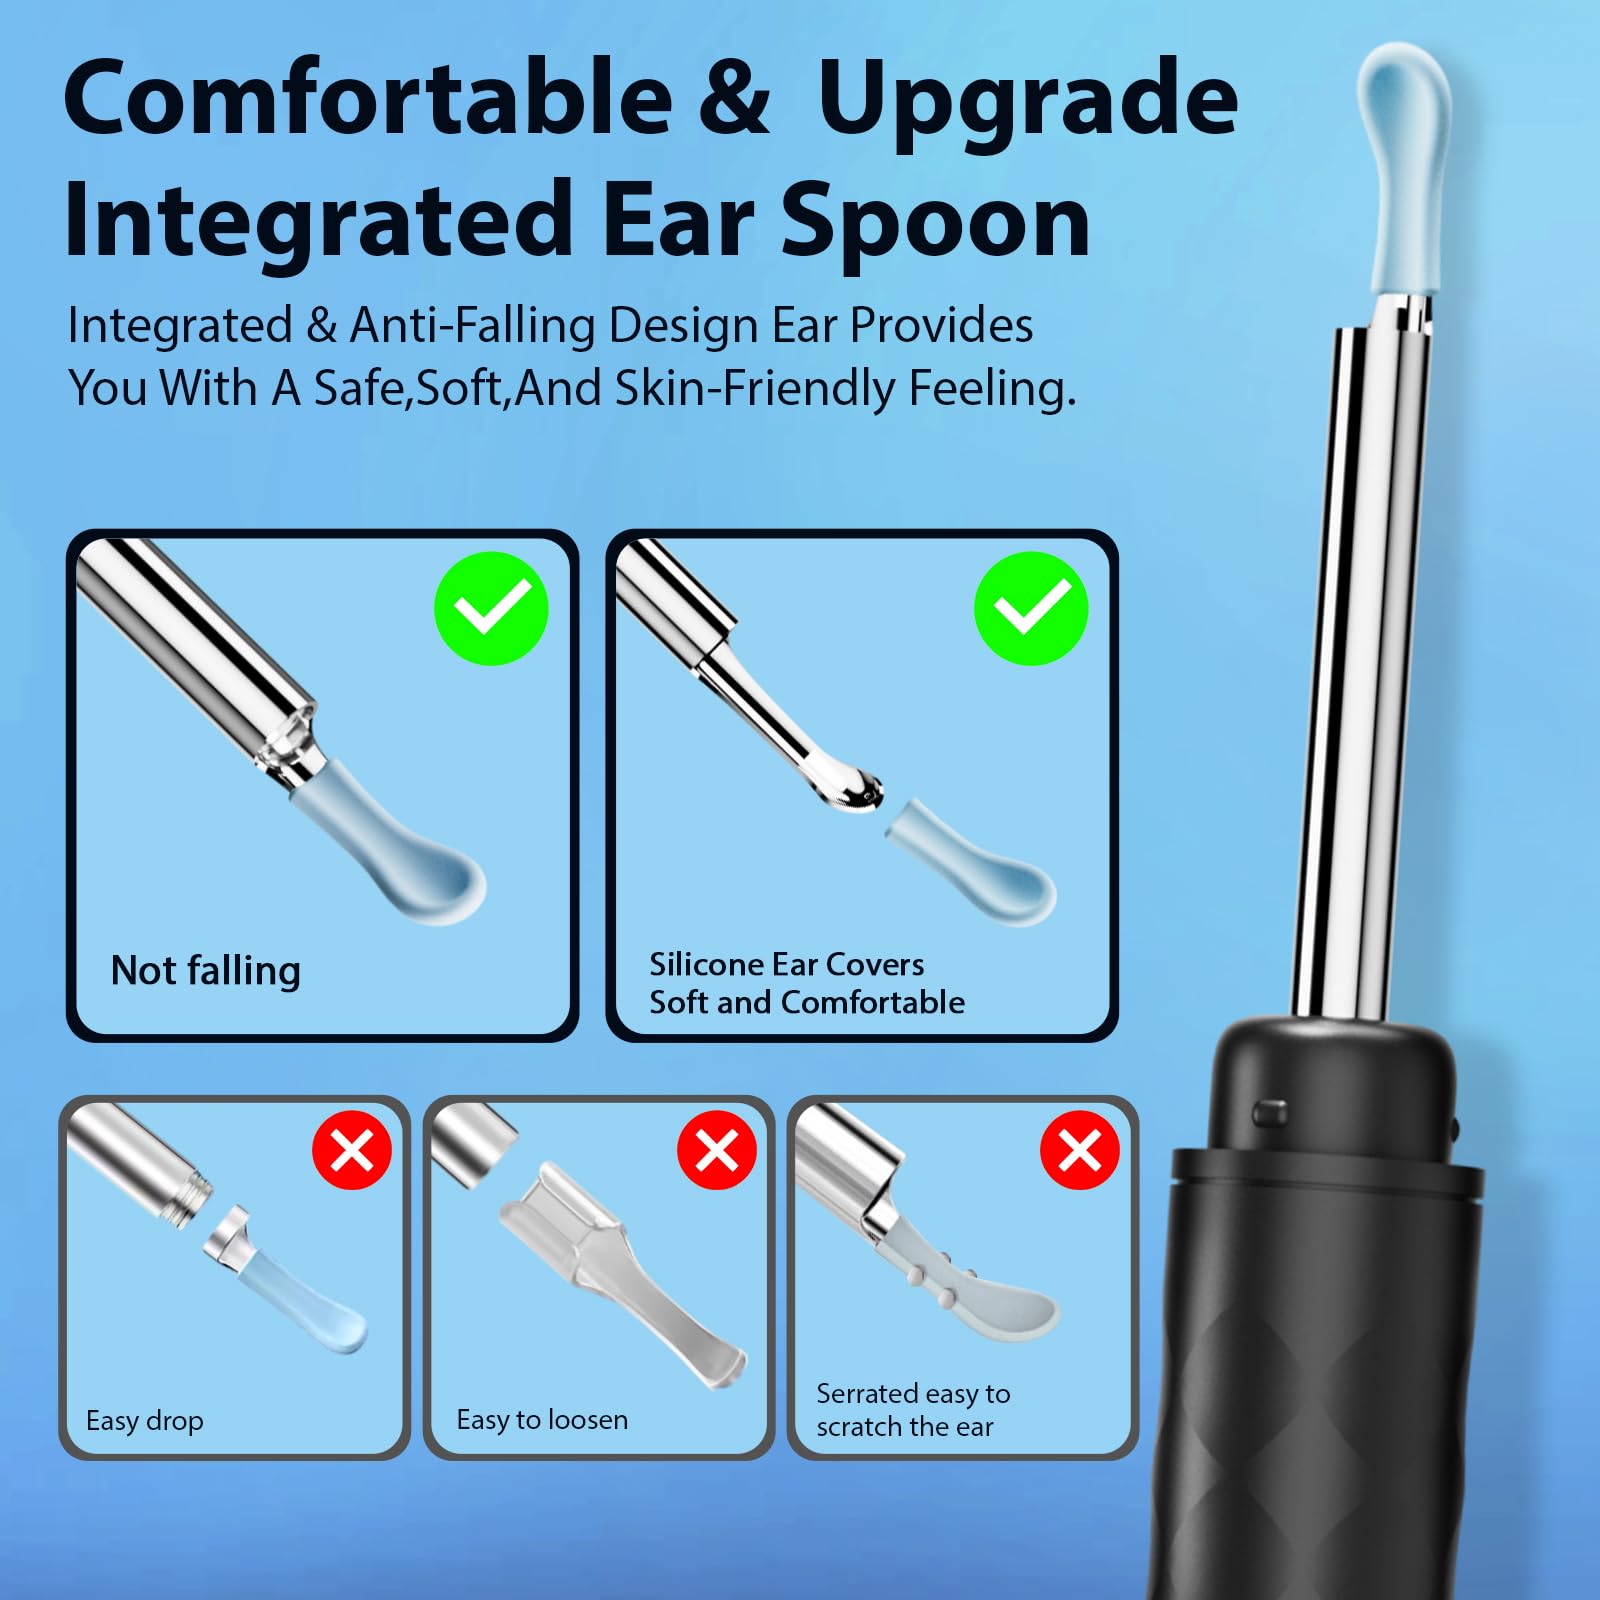 Ear Wax Removal, Ear Wax Removal Tool with 1296P HD Camera and 6 LED Lights, Ear Cleaner with 10 Ear Pick, Upgrade Ear Wax Removal Tool for iOS and Android, Black